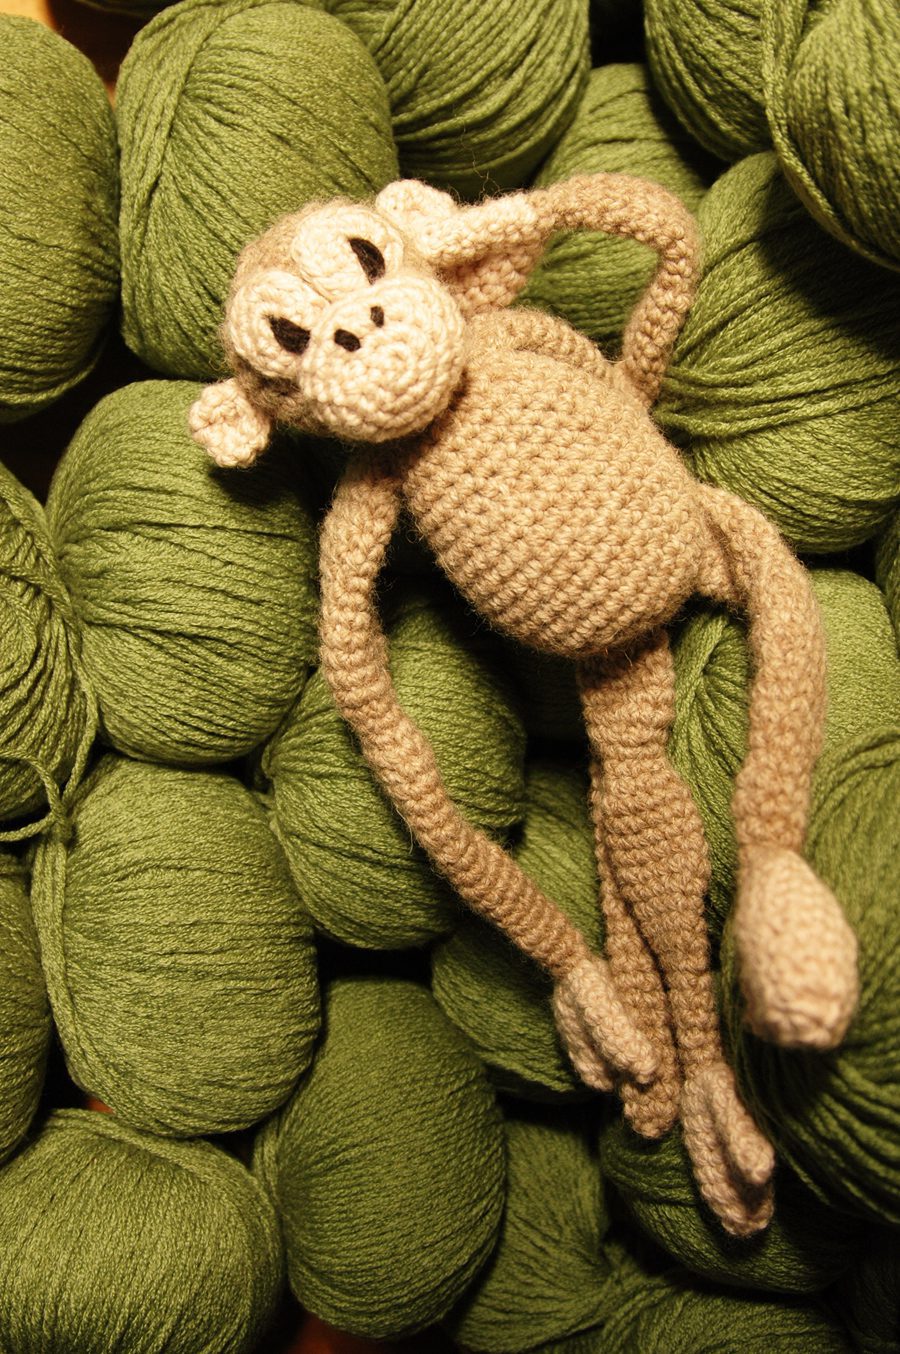 You can be a part of the #crochetjungle project to help children in hospice